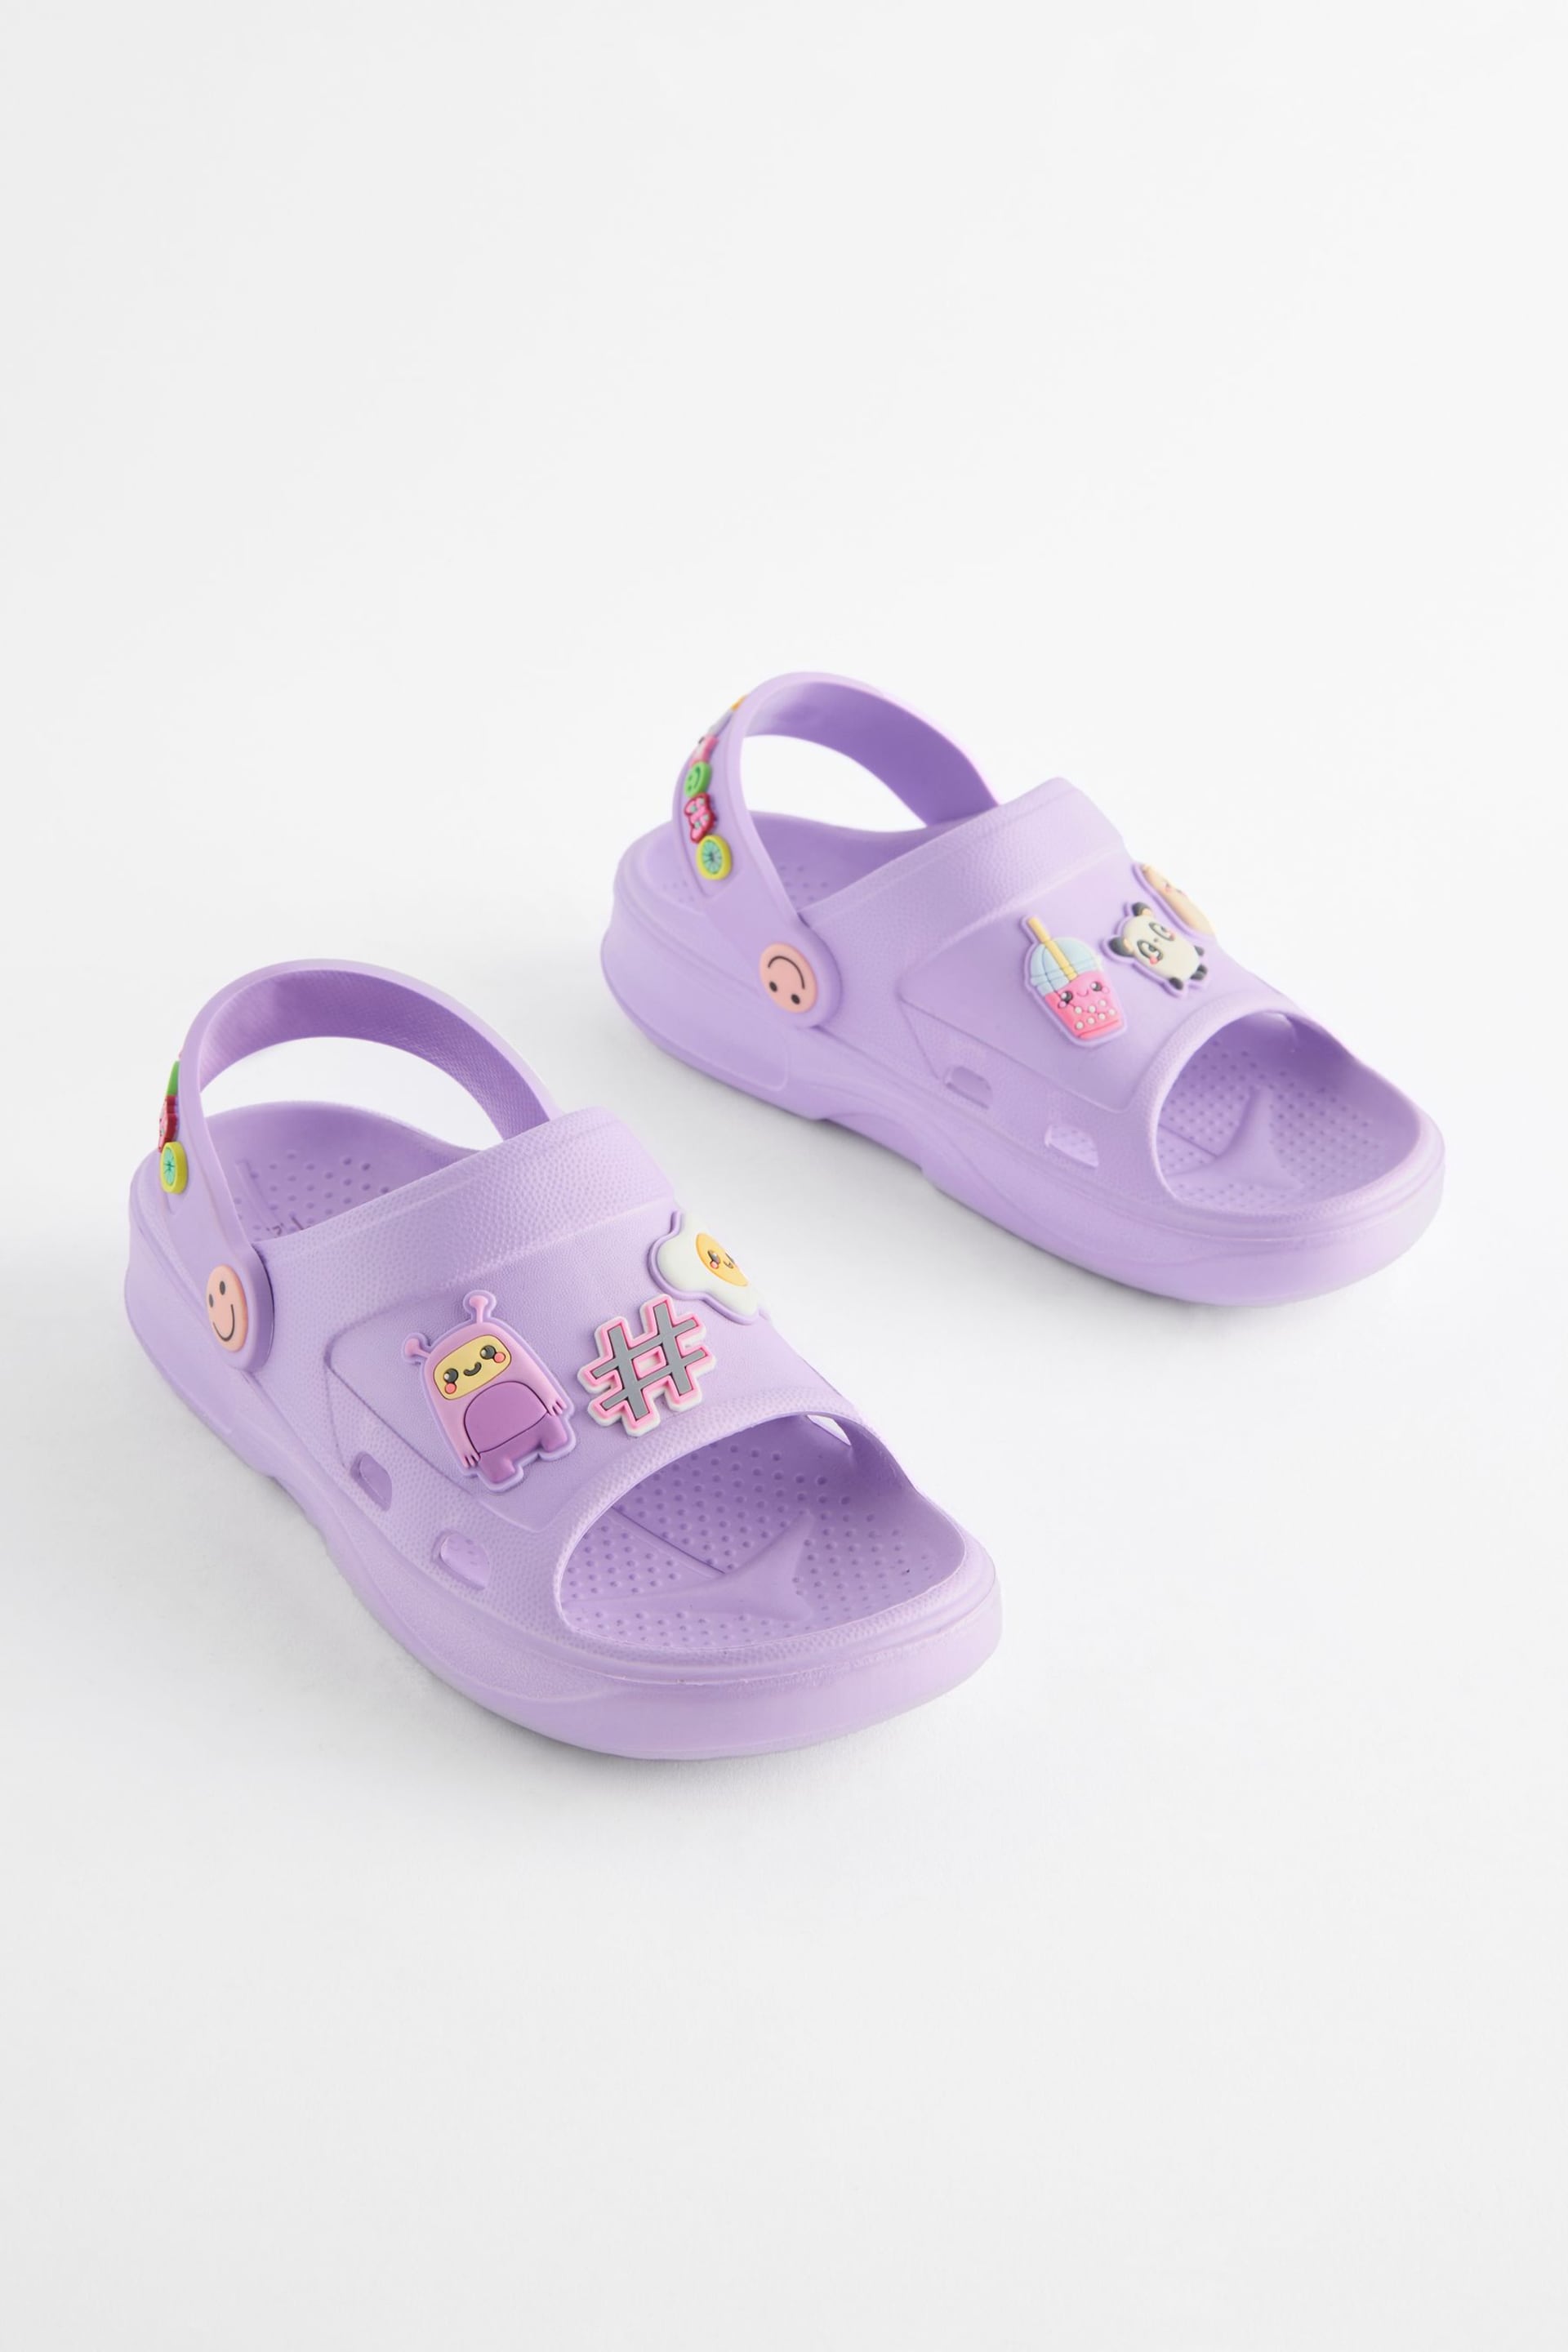 Purple Character Badge Clogs - Image 5 of 9